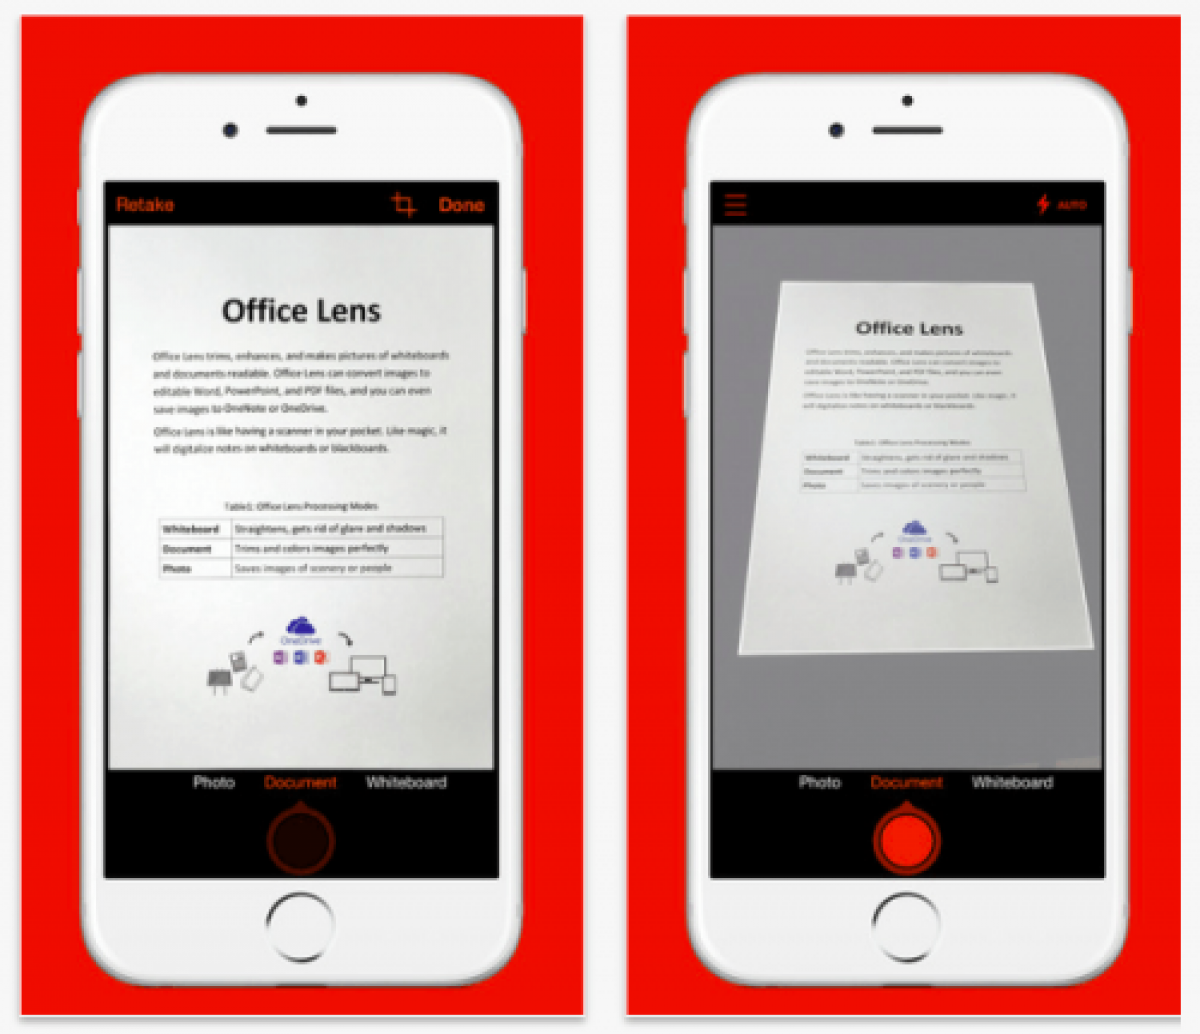 Moderniseren bout slaaf Microsoft Office Lens app now available for iOS and Android | TelecomTalk